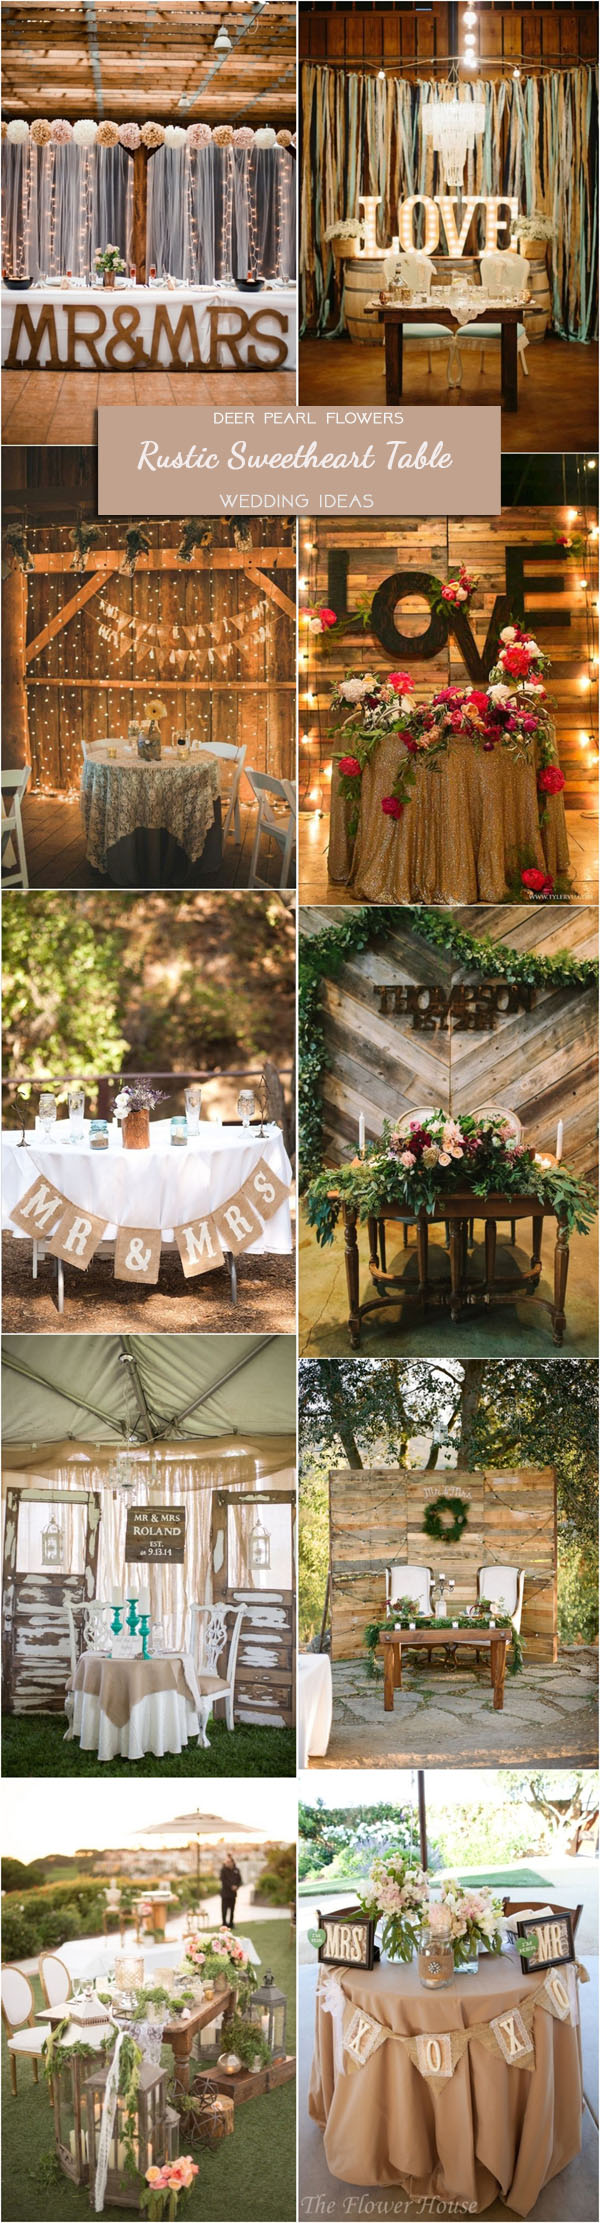 Rustic country wedding ideas - rustic sweetheart table decor for wedding reception